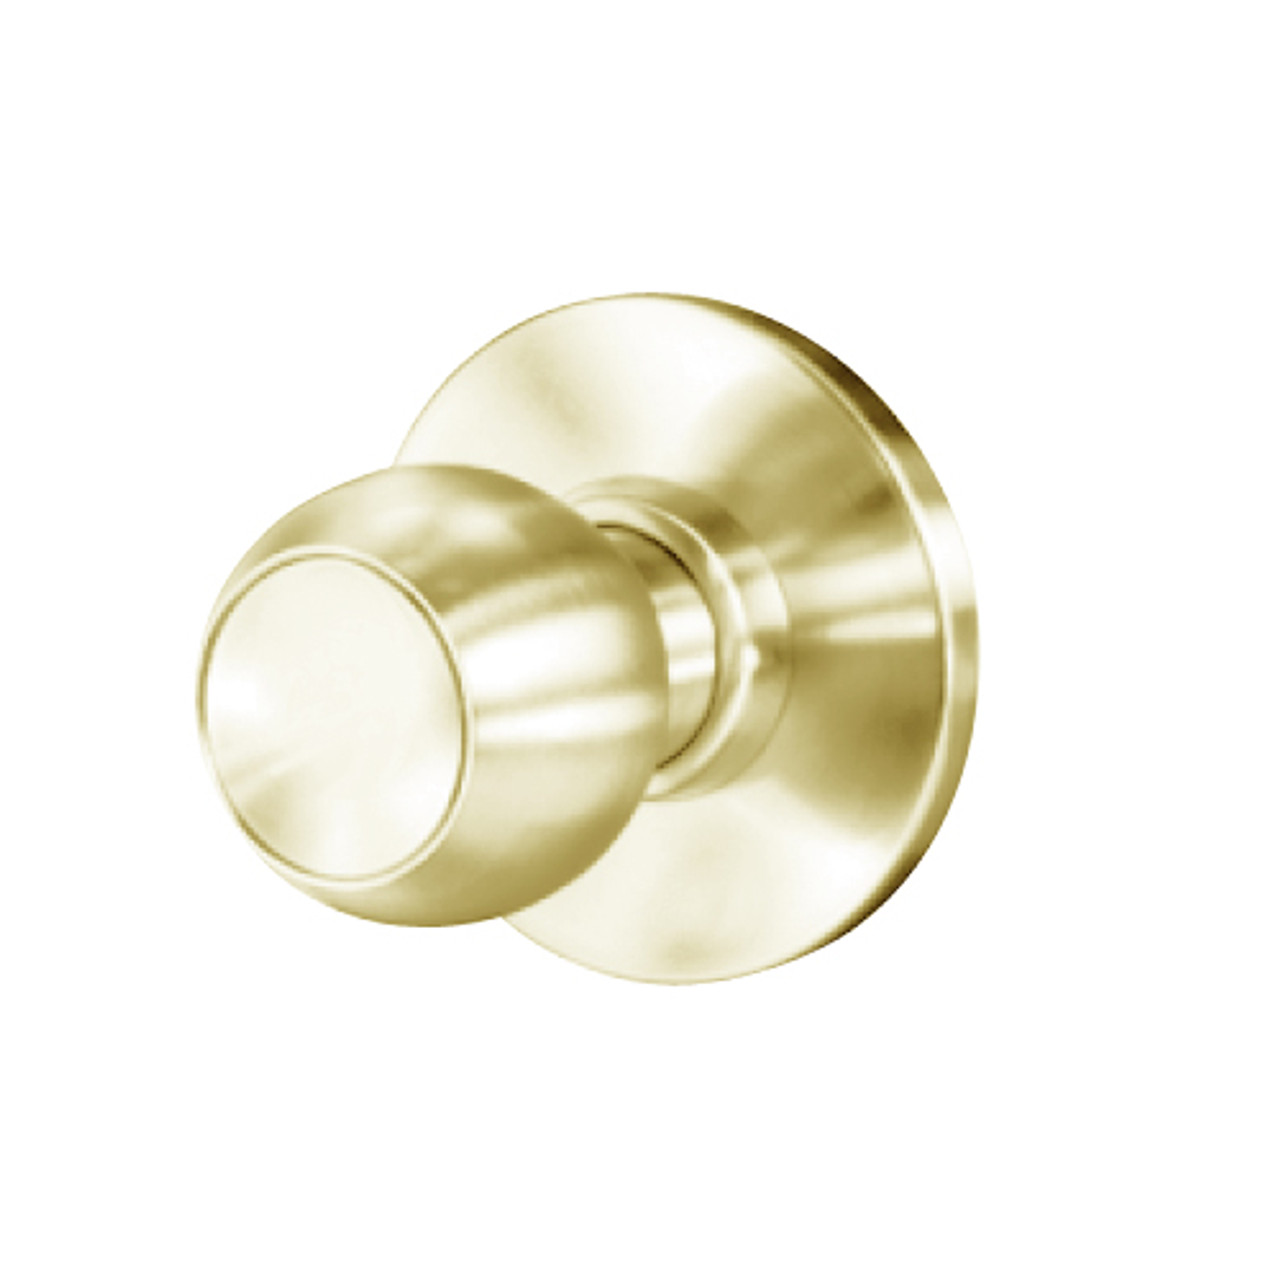 8K30M4AS3606 Best 8K Series Communicating Heavy Duty Cylindrical Knob Locks with Round Style in Satin Brass